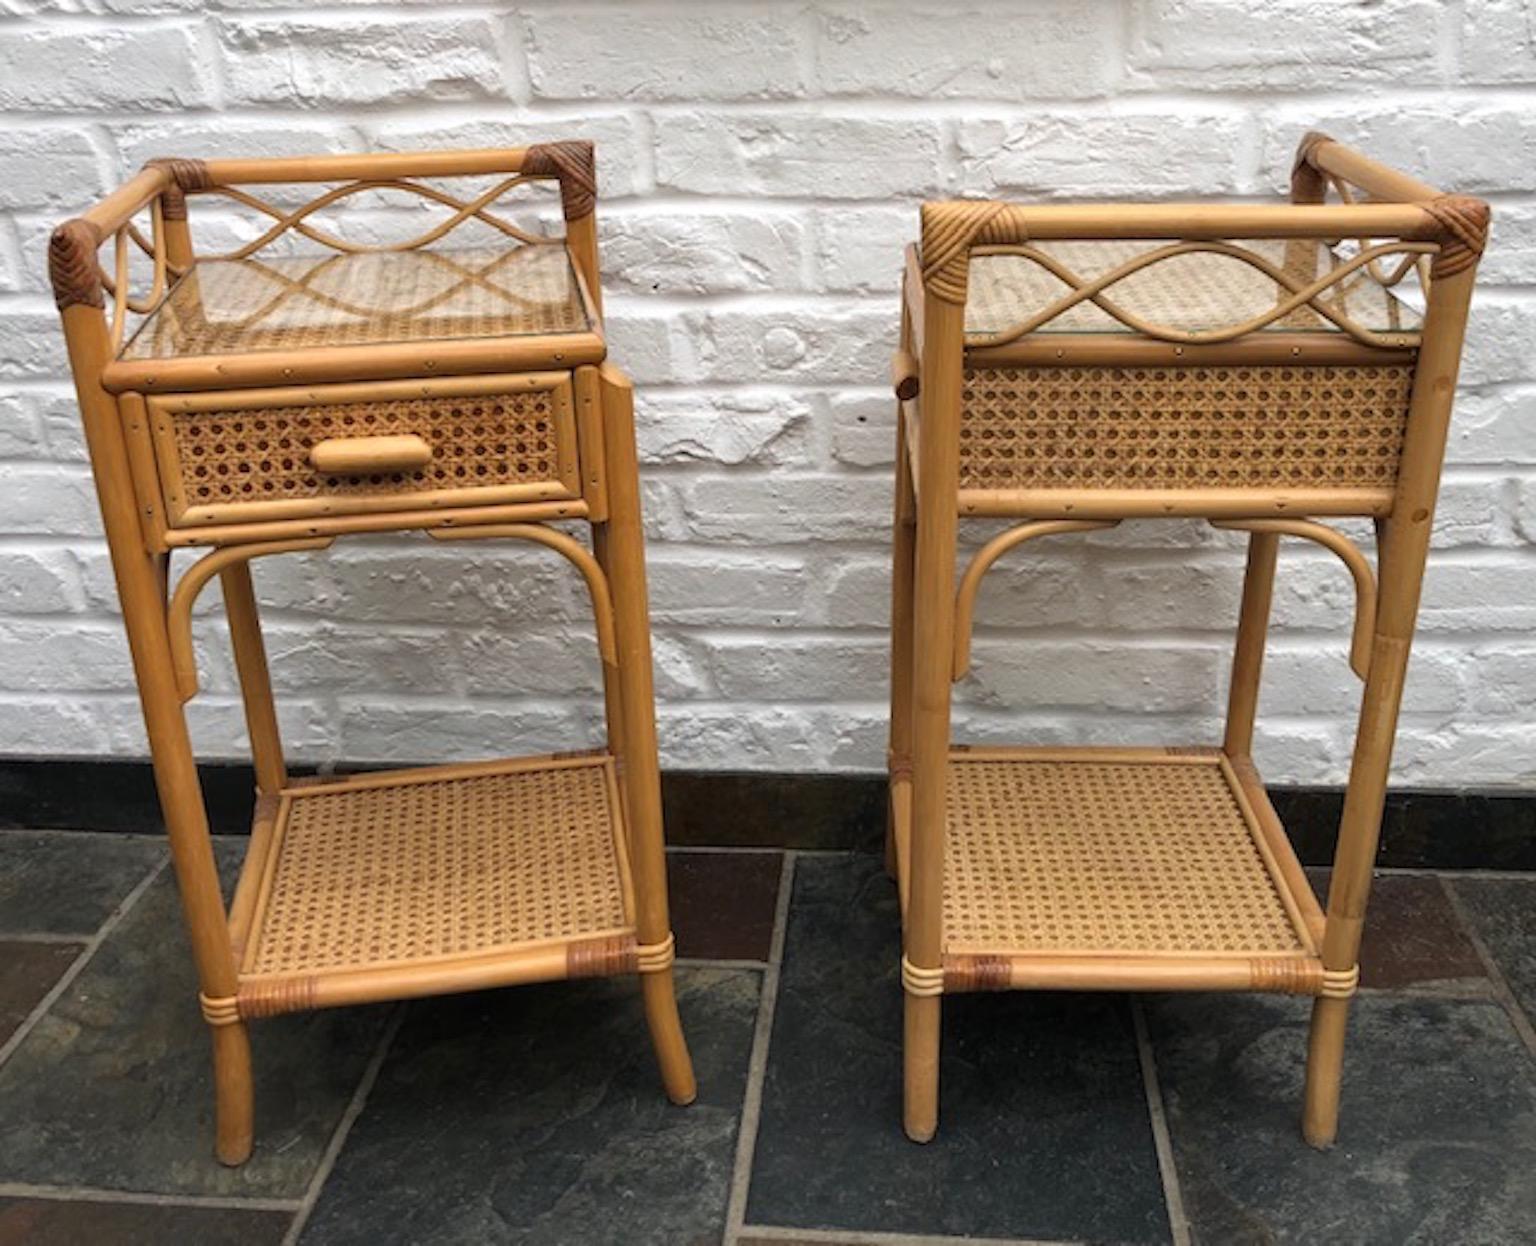 Pair of mid century rattan / cane nightstands / bedside table by English company, Angraves, England, 1970s

Each nightstand has 1 x drawer with a cane handle, and a shelf below, they are covered in cane weave matting, and 
each have new glass for